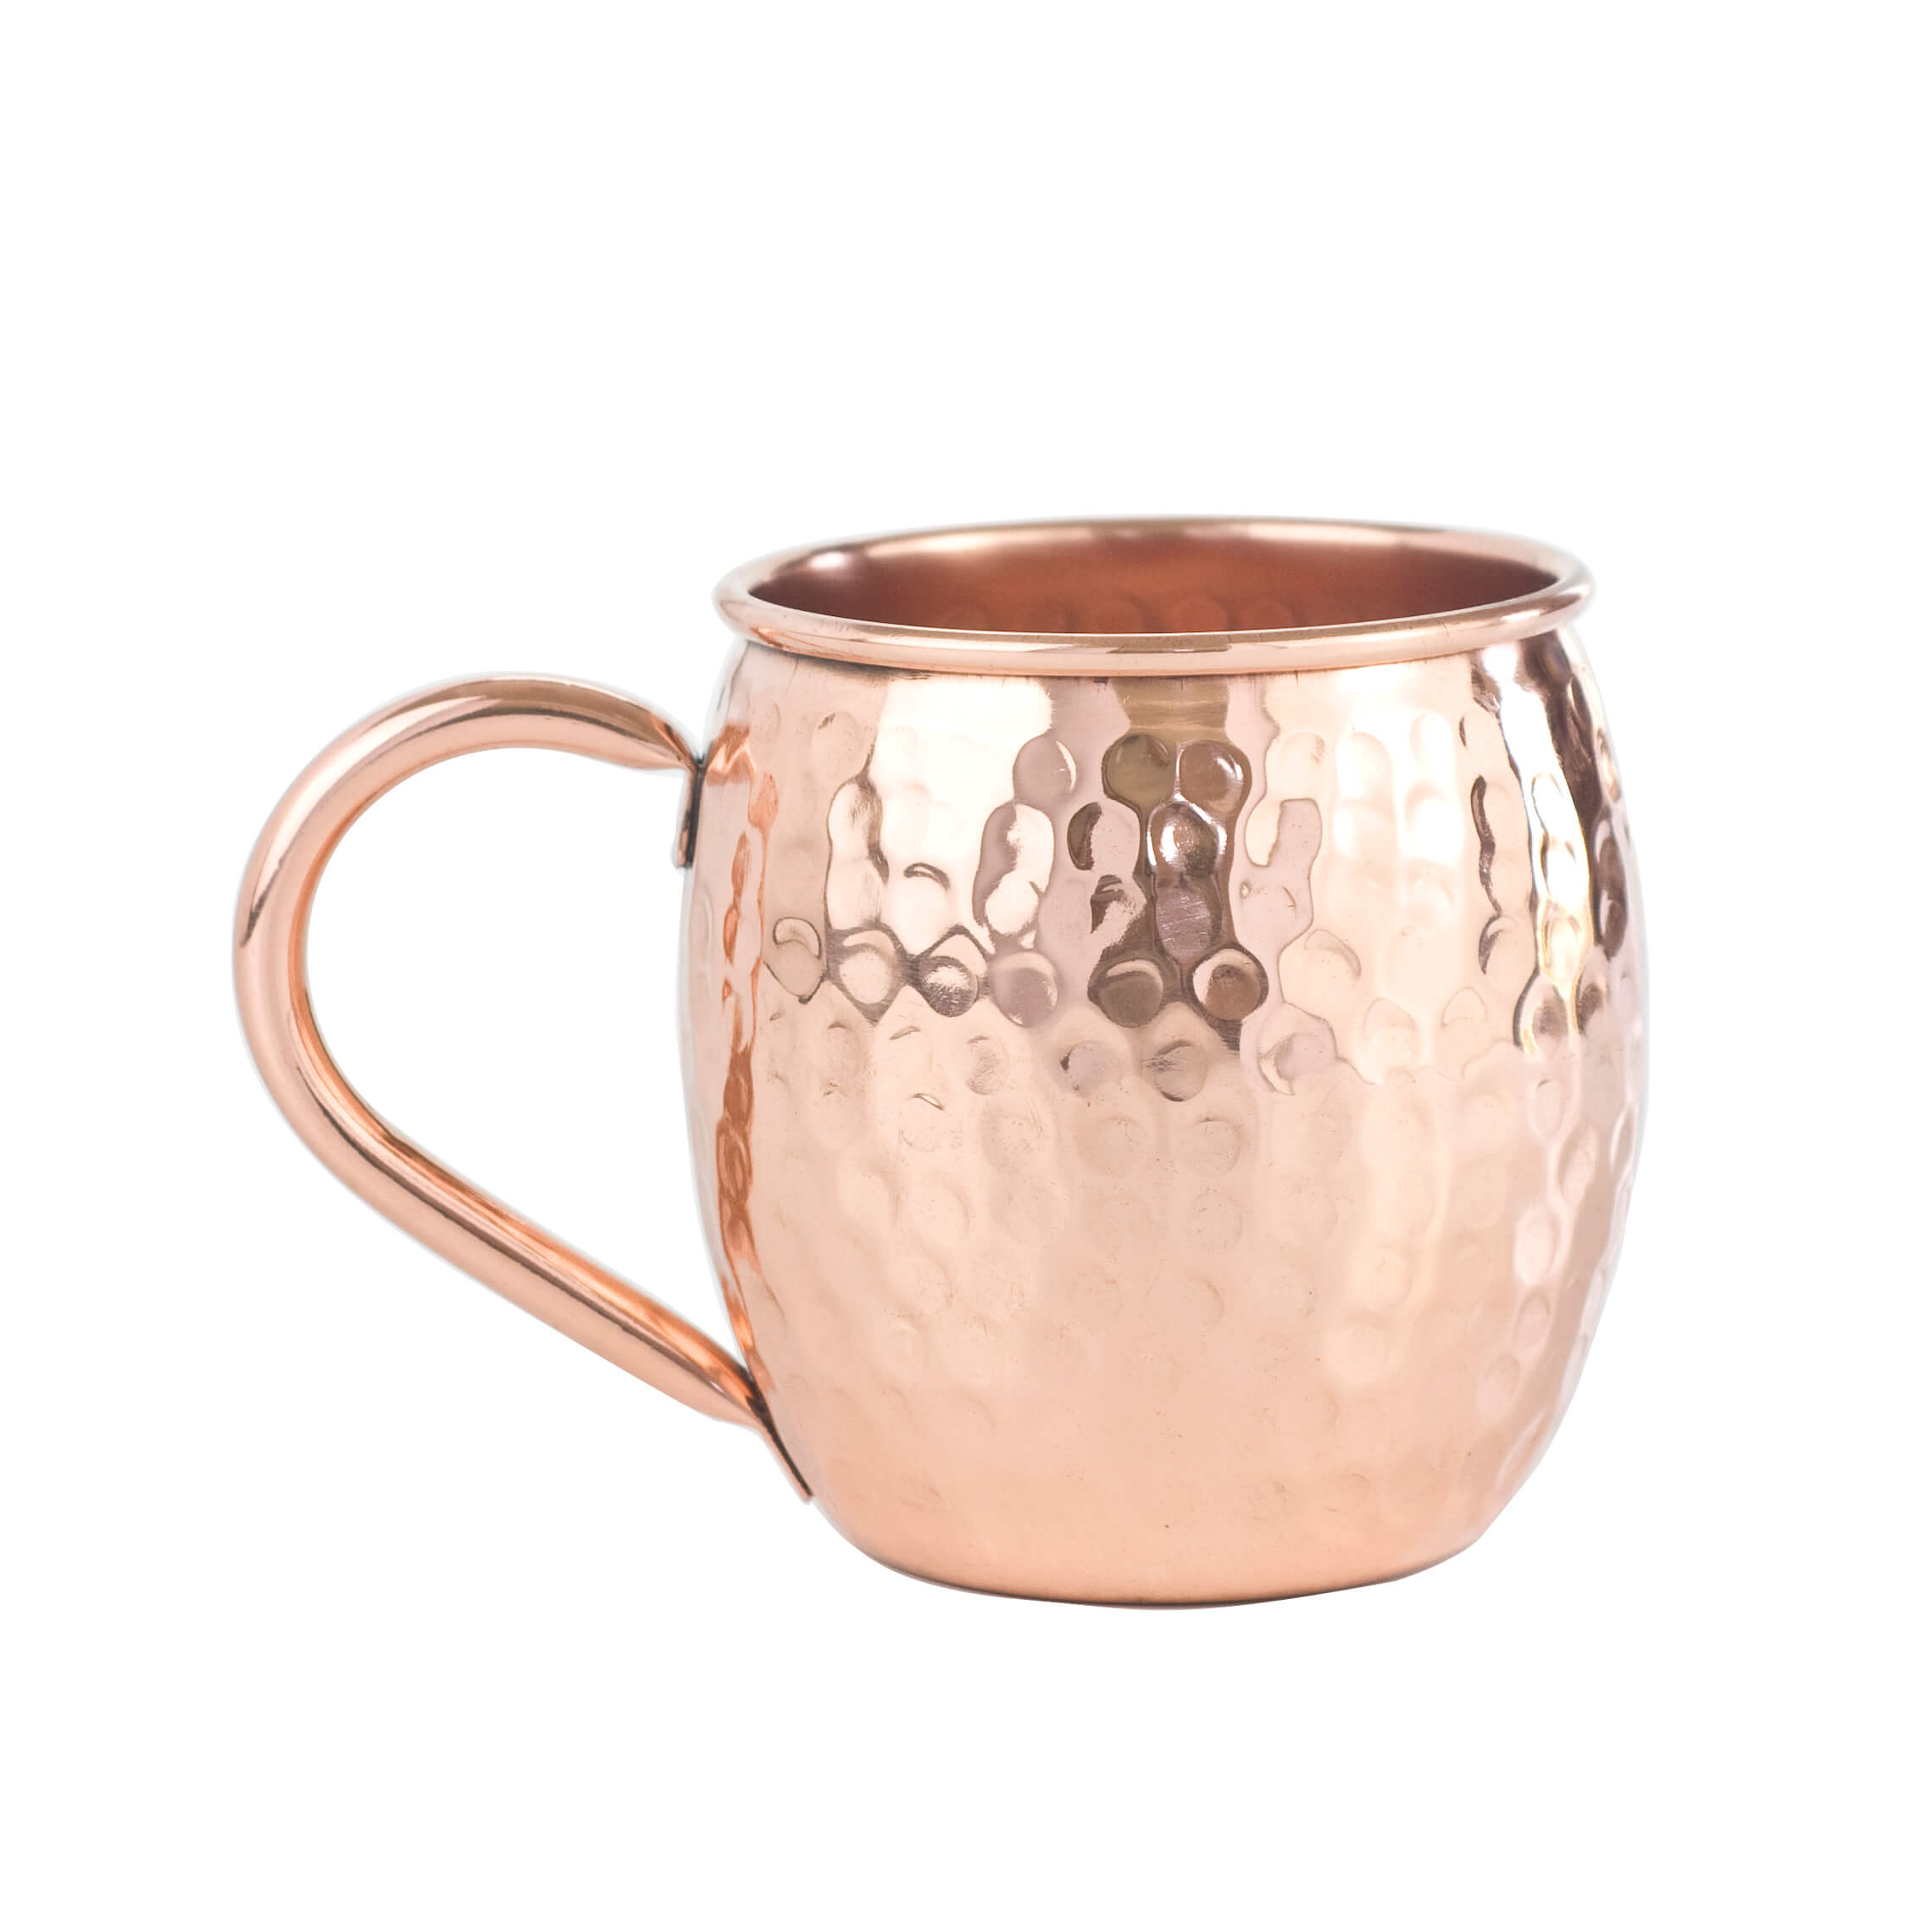 100% Pure Copper Hand Hammered  Moscow Mule Mugs /Cups Copper Mug Bottle05 